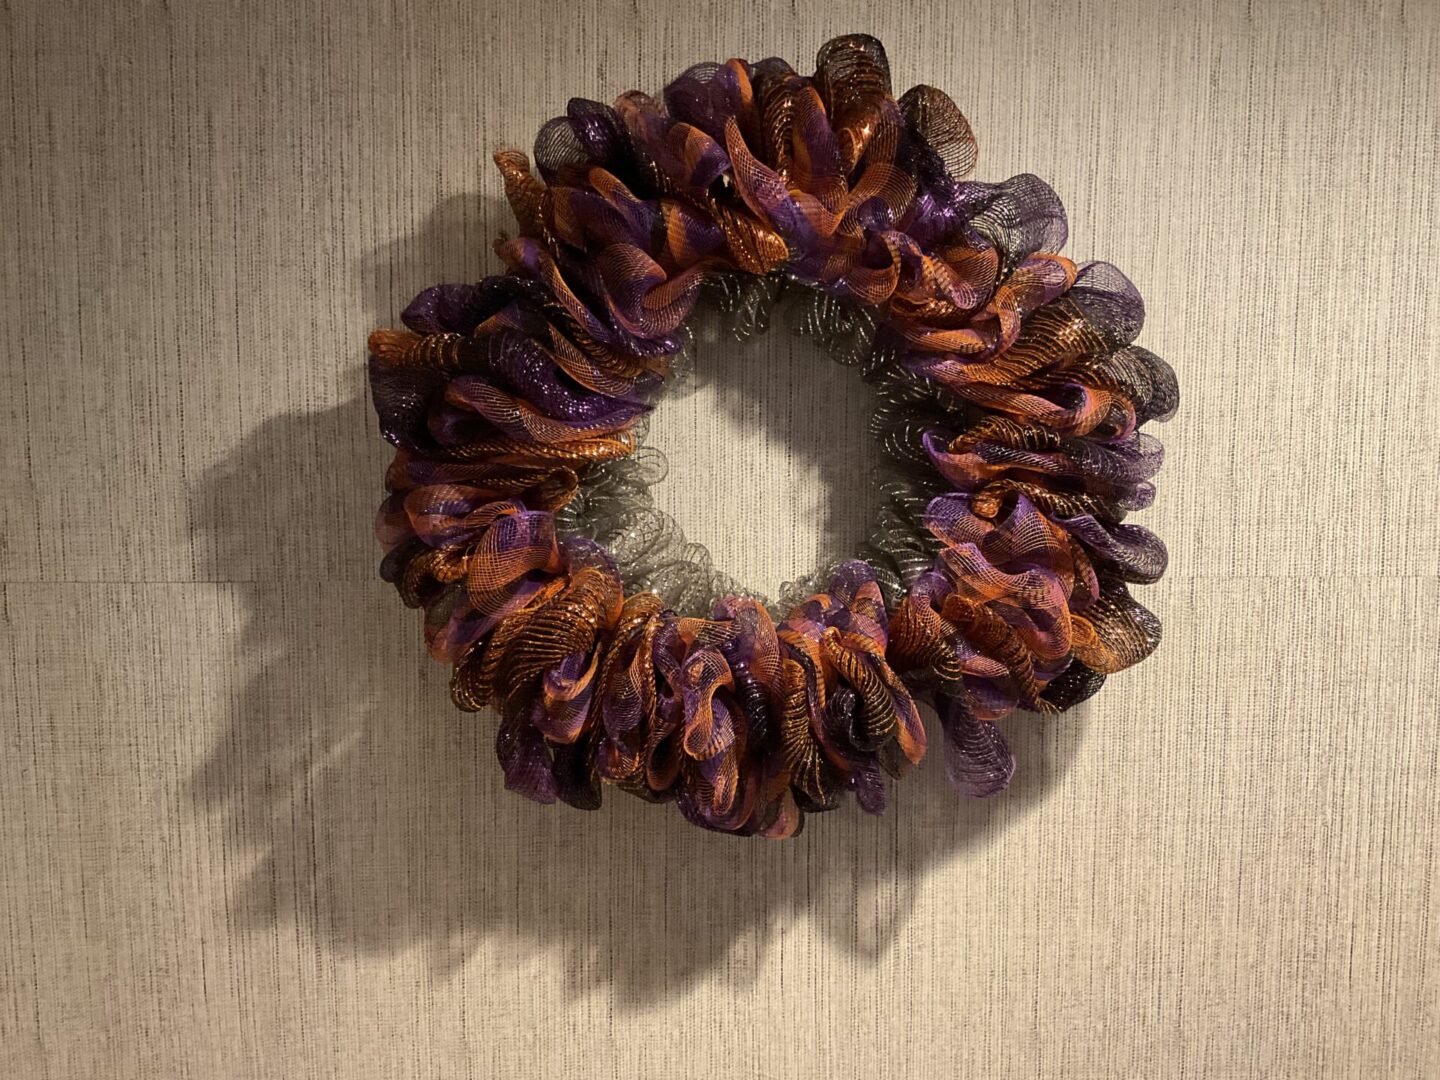 A wreath made of purple and brown fabric.